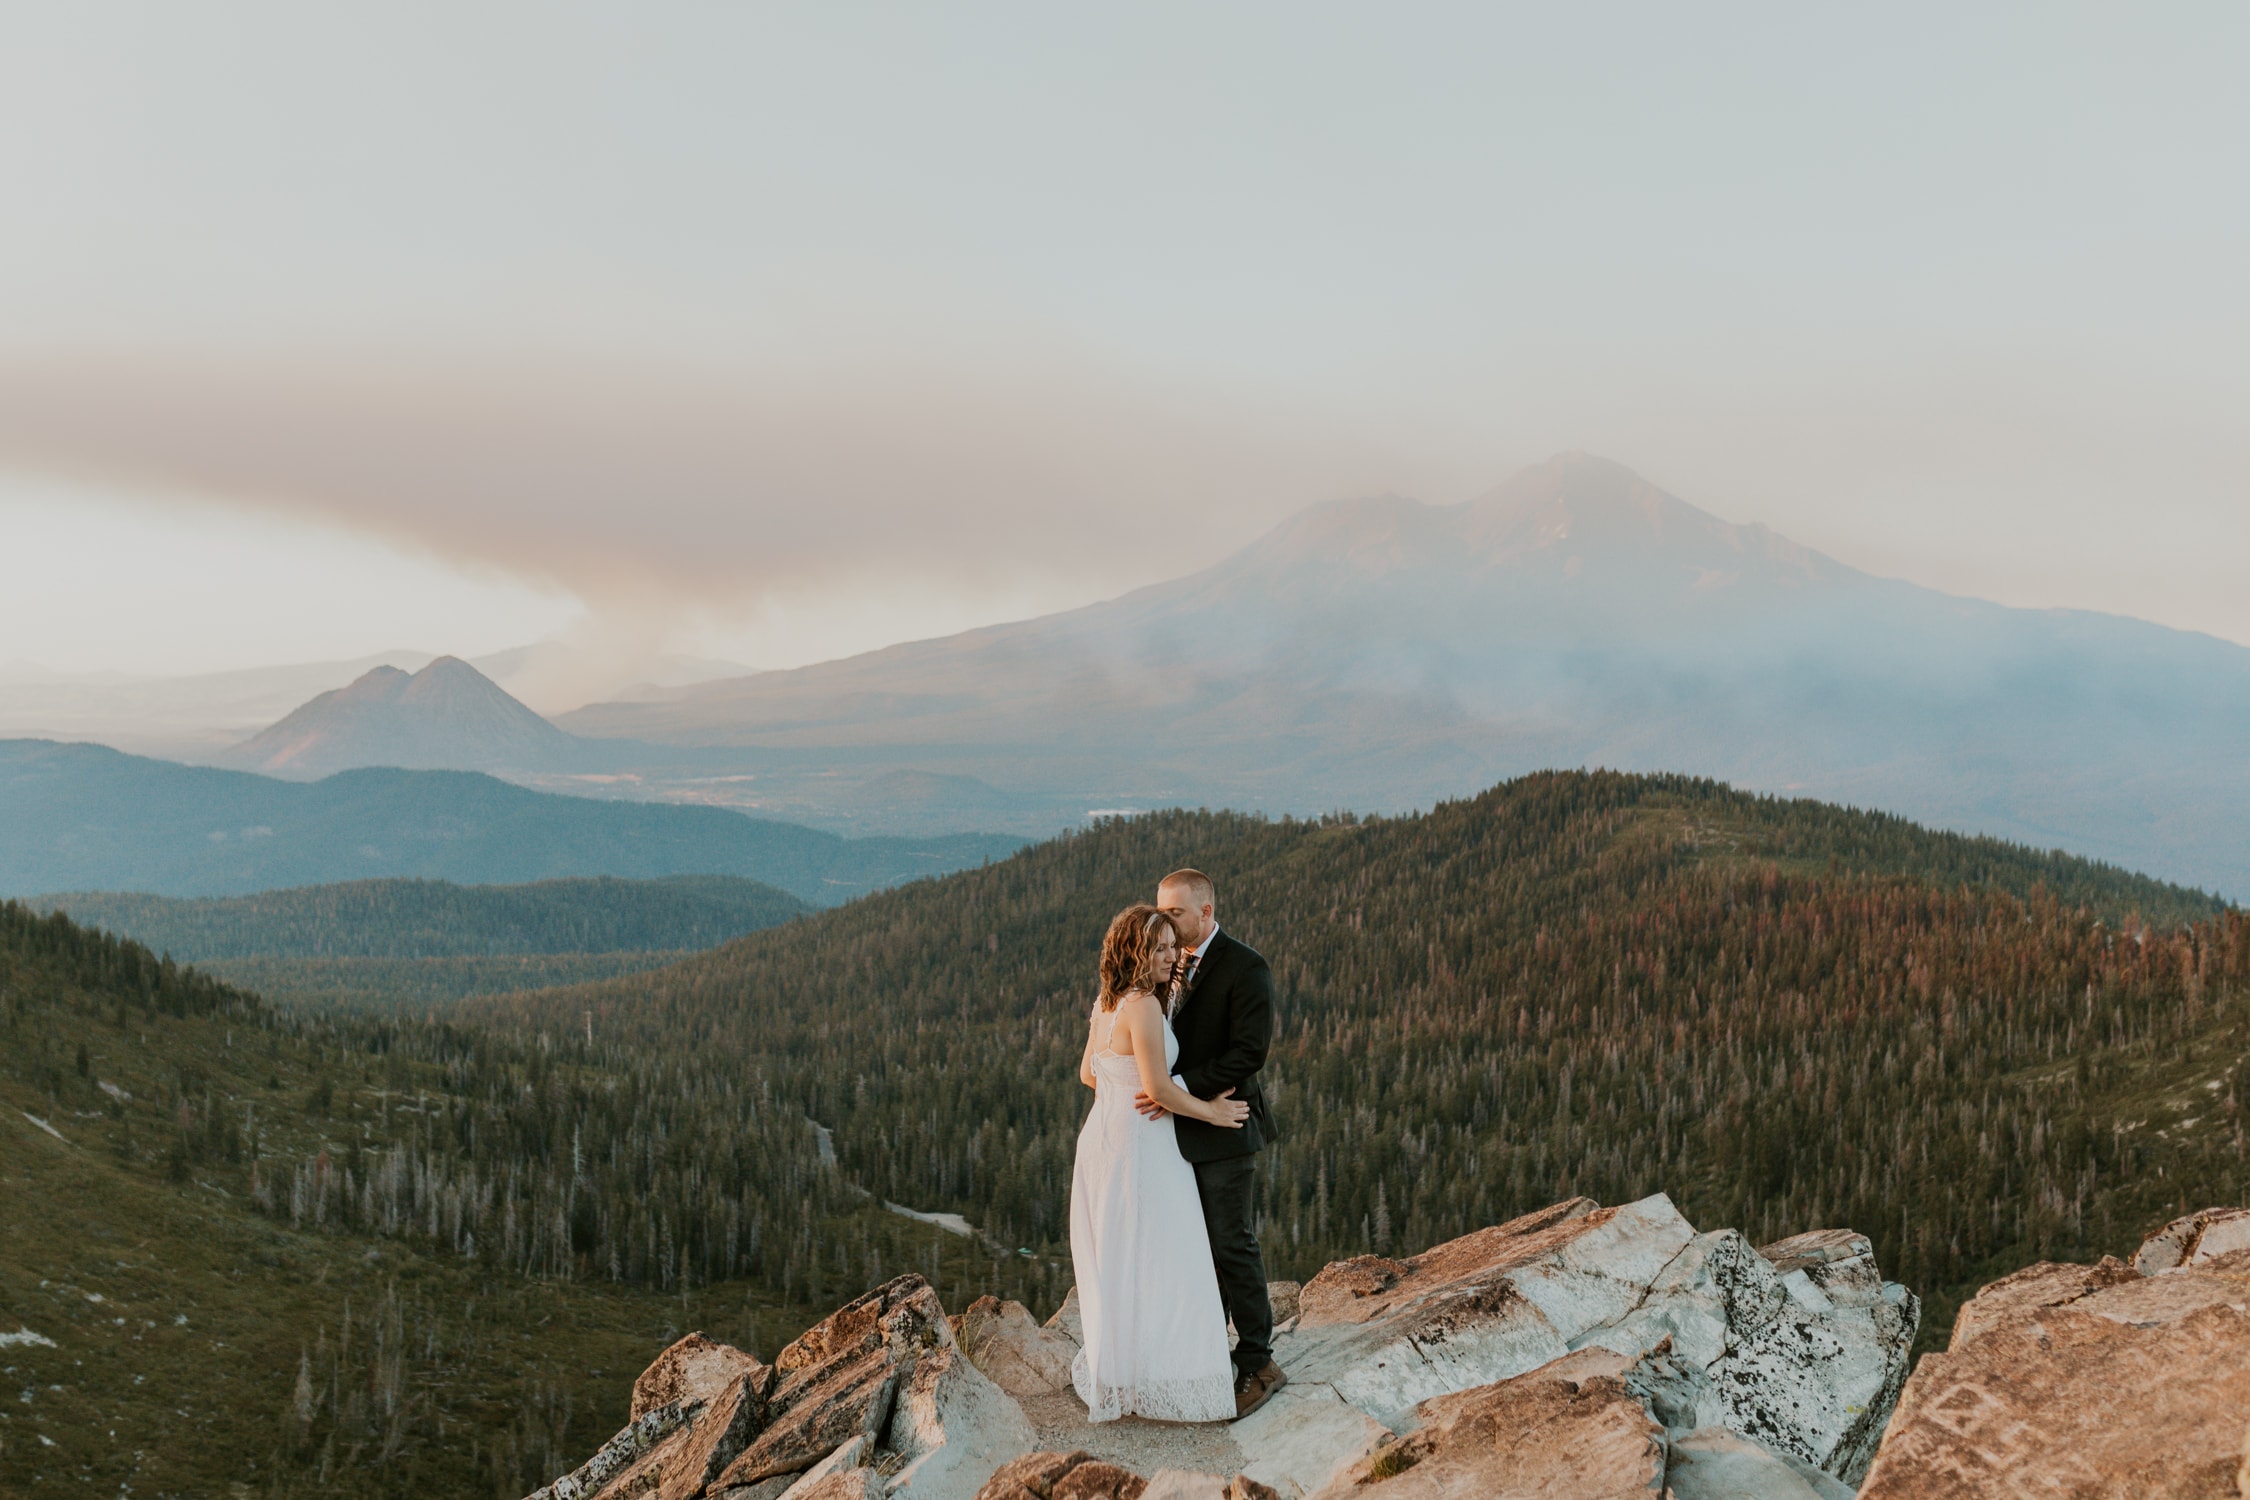 A couple hugging on a mountain for their Mt. Shasta wedding